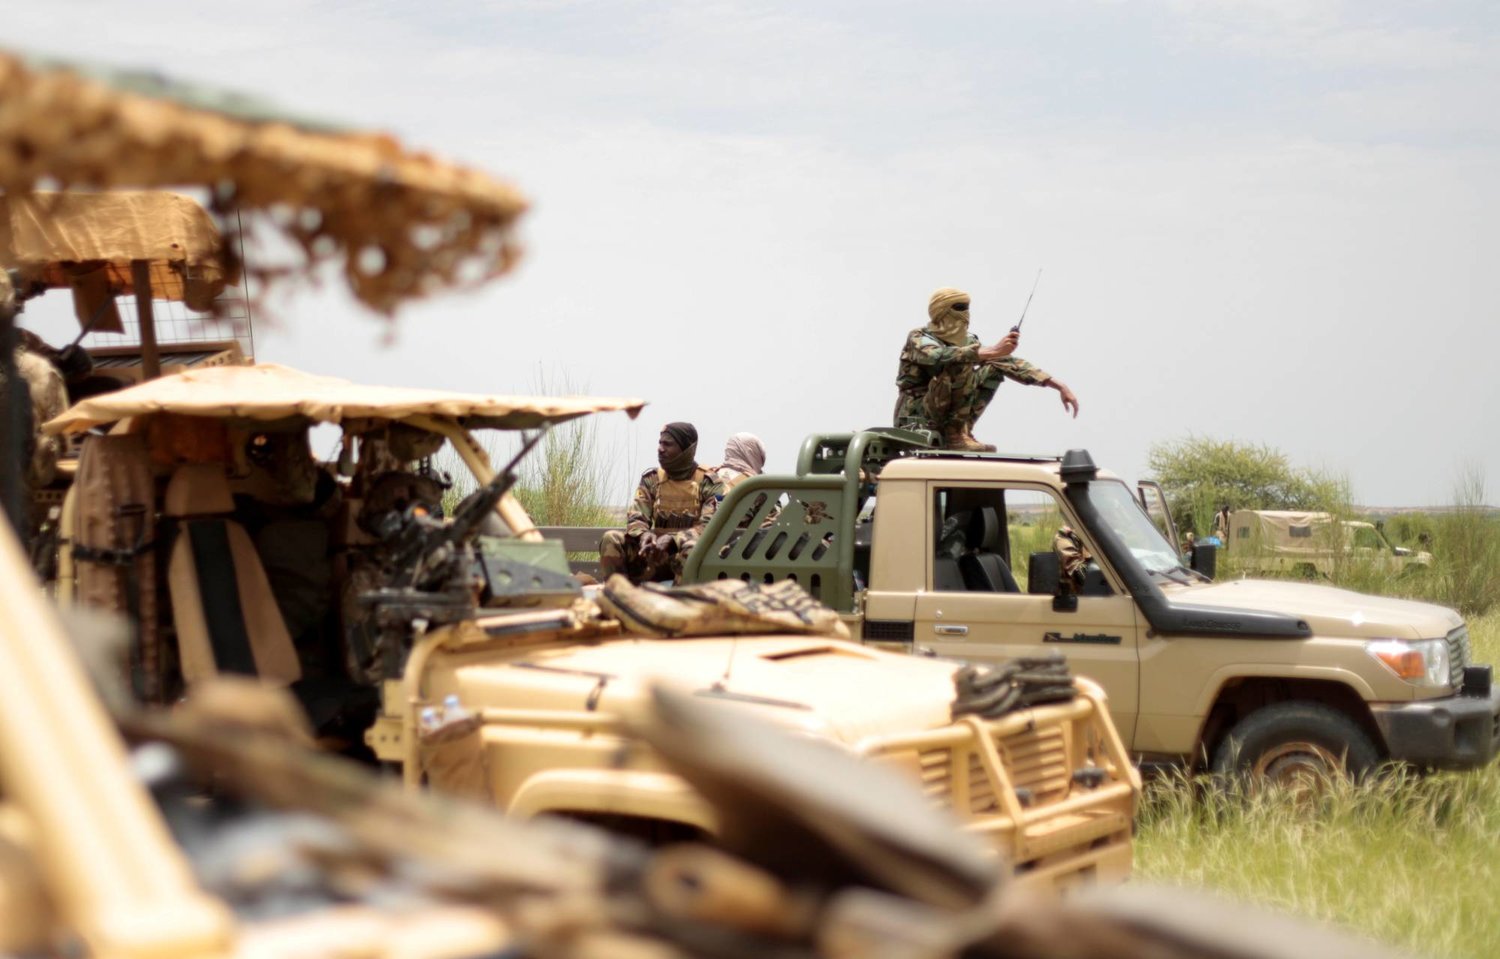 Are Terrorist Activities Increasing in the Sahel Region After the Niger Coup?